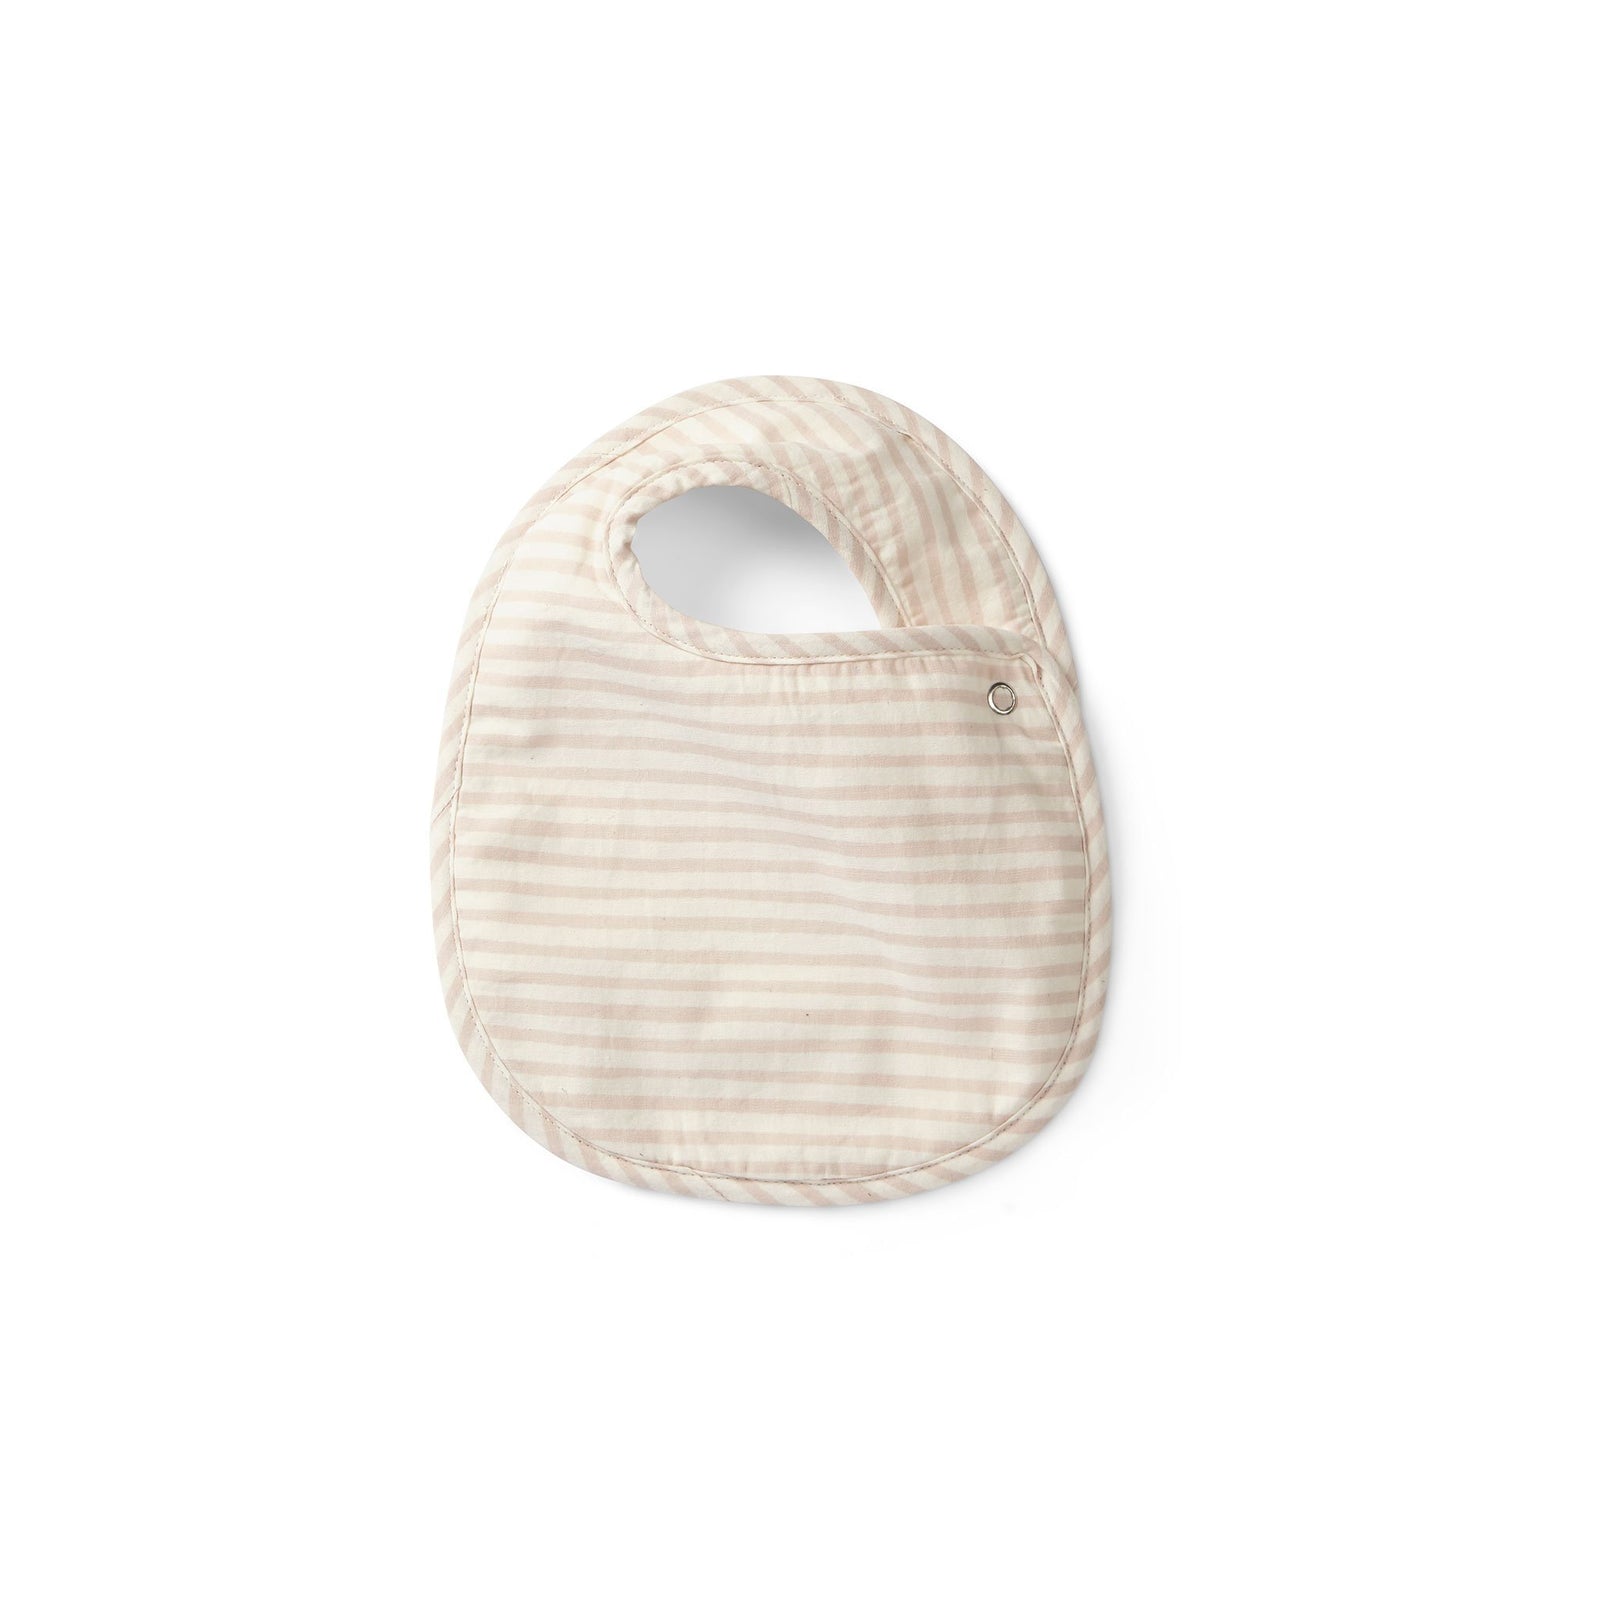 One of the bibs from Pehr Stripes Away Pebble Bib Set of 3. Hand printed. White with light pink stripes.